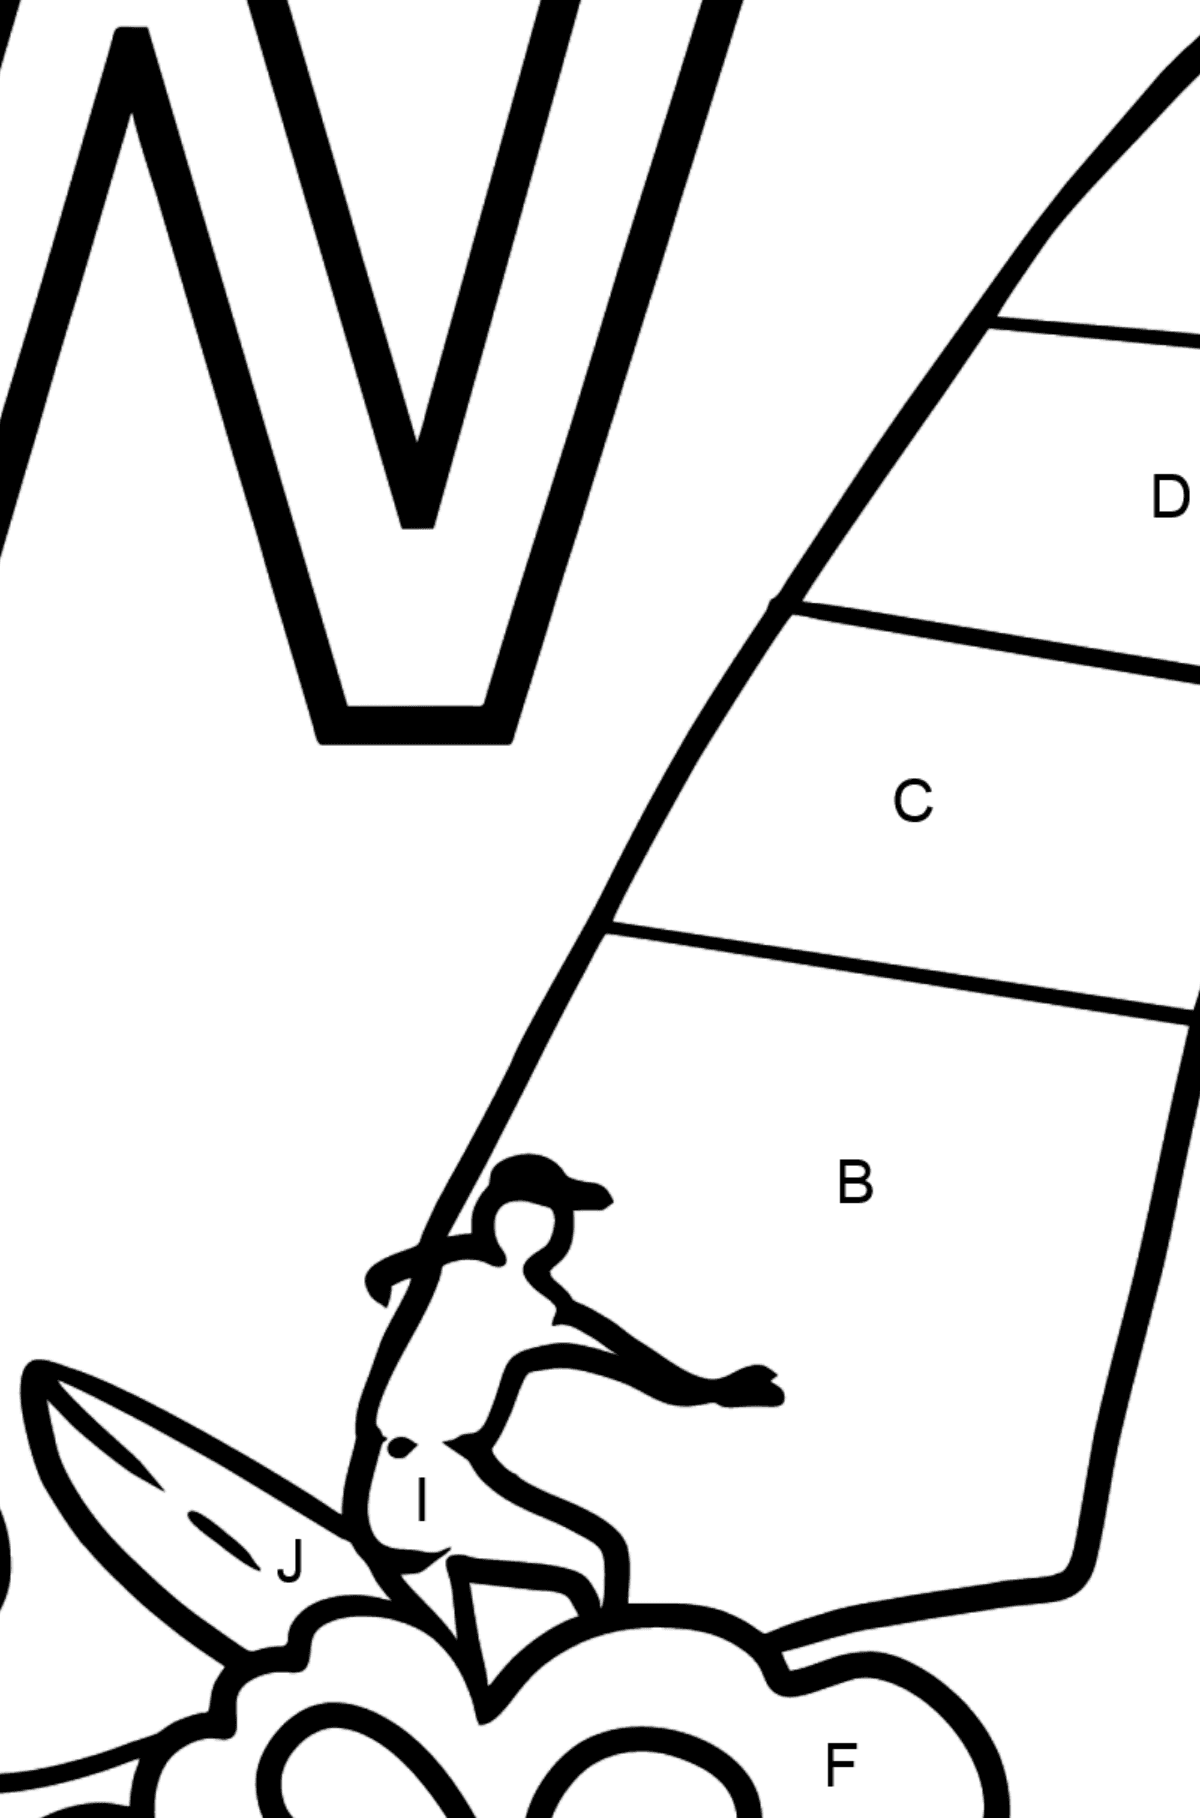 Portuguese Letter W coloring pages - WINDSURF - Coloring by Letters for Kids